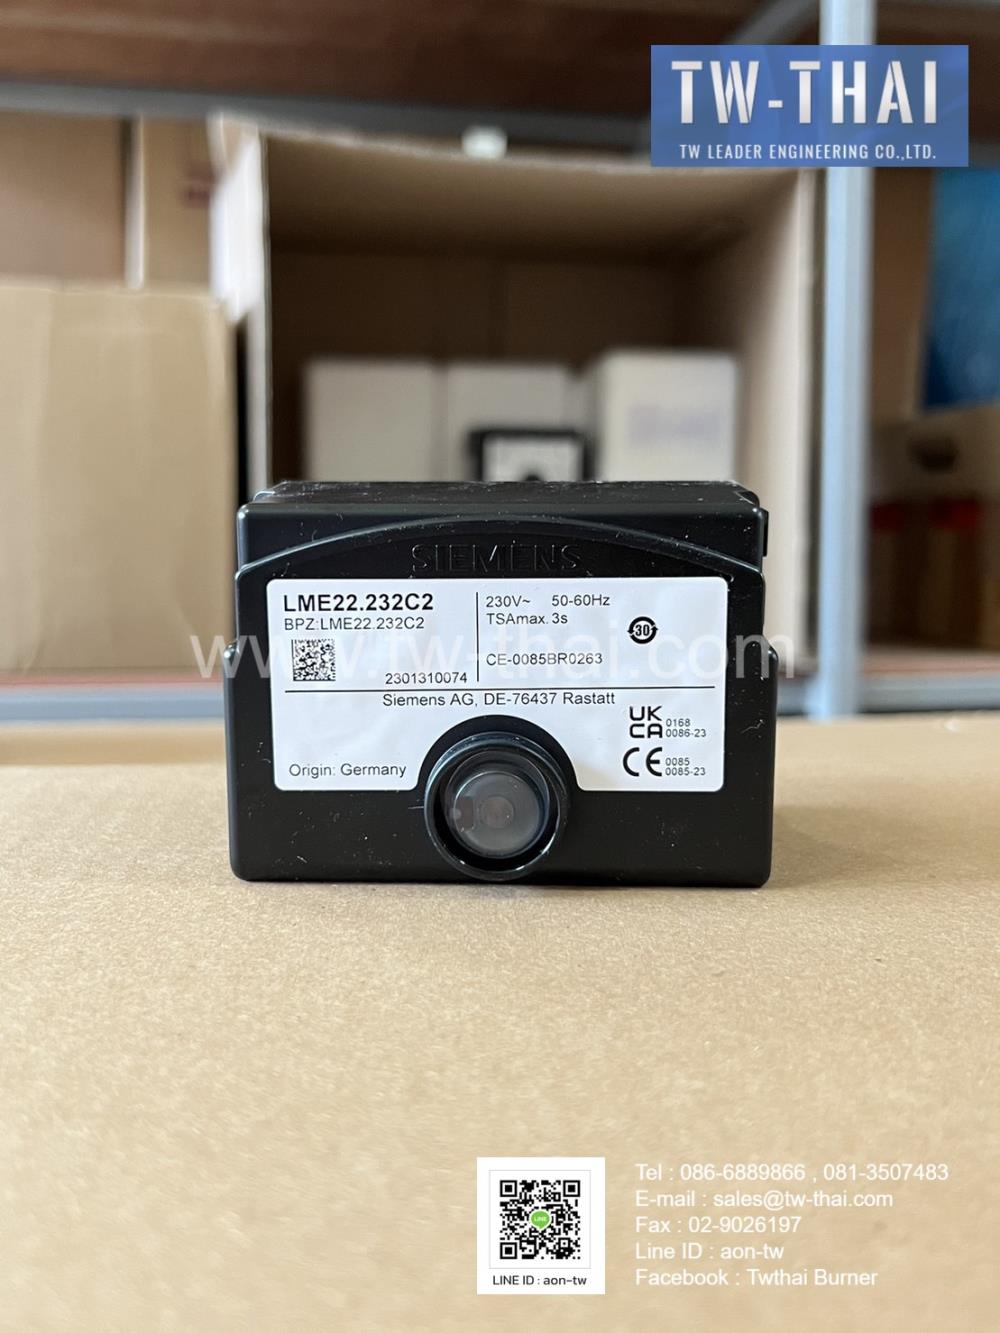 Siemens  LME22.232C2, LME22.232C2, LME22,Siemens  LME22.232C2,Siemens  LME22,Burner control,Siemens,Instruments and Controls/Controllers